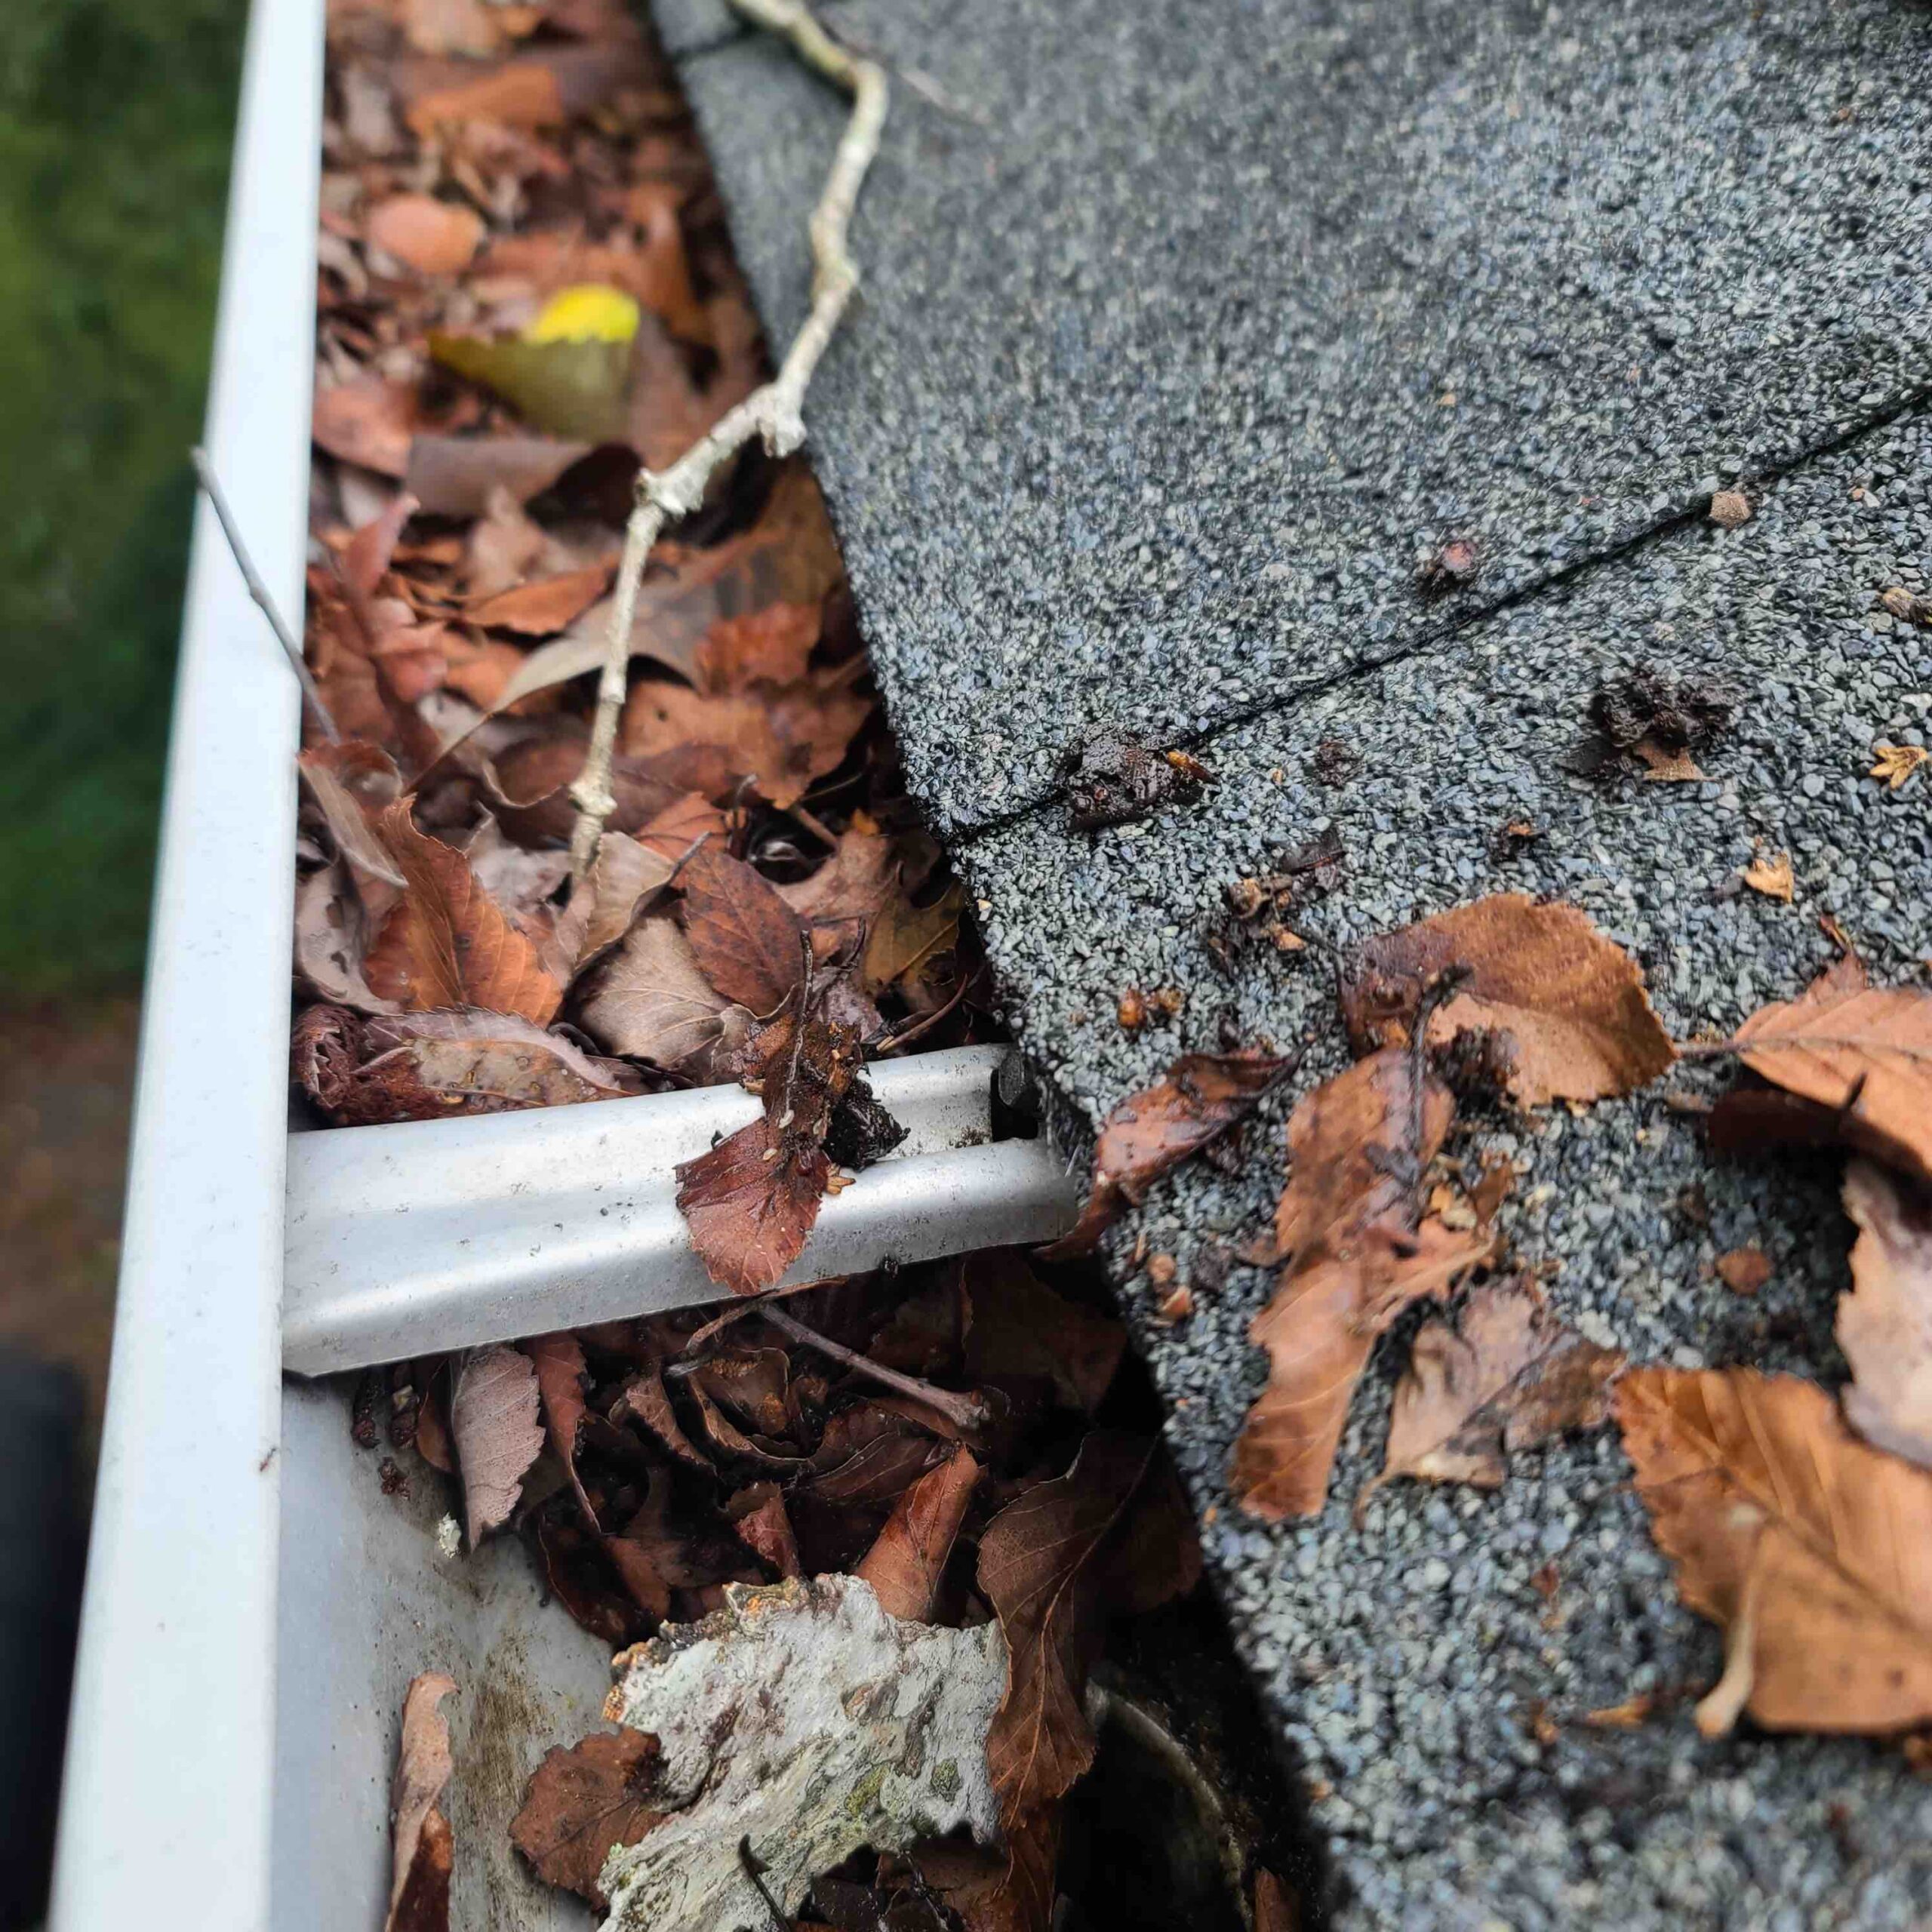 Uncovered gutter clogged with leaves that needs to be cleaned